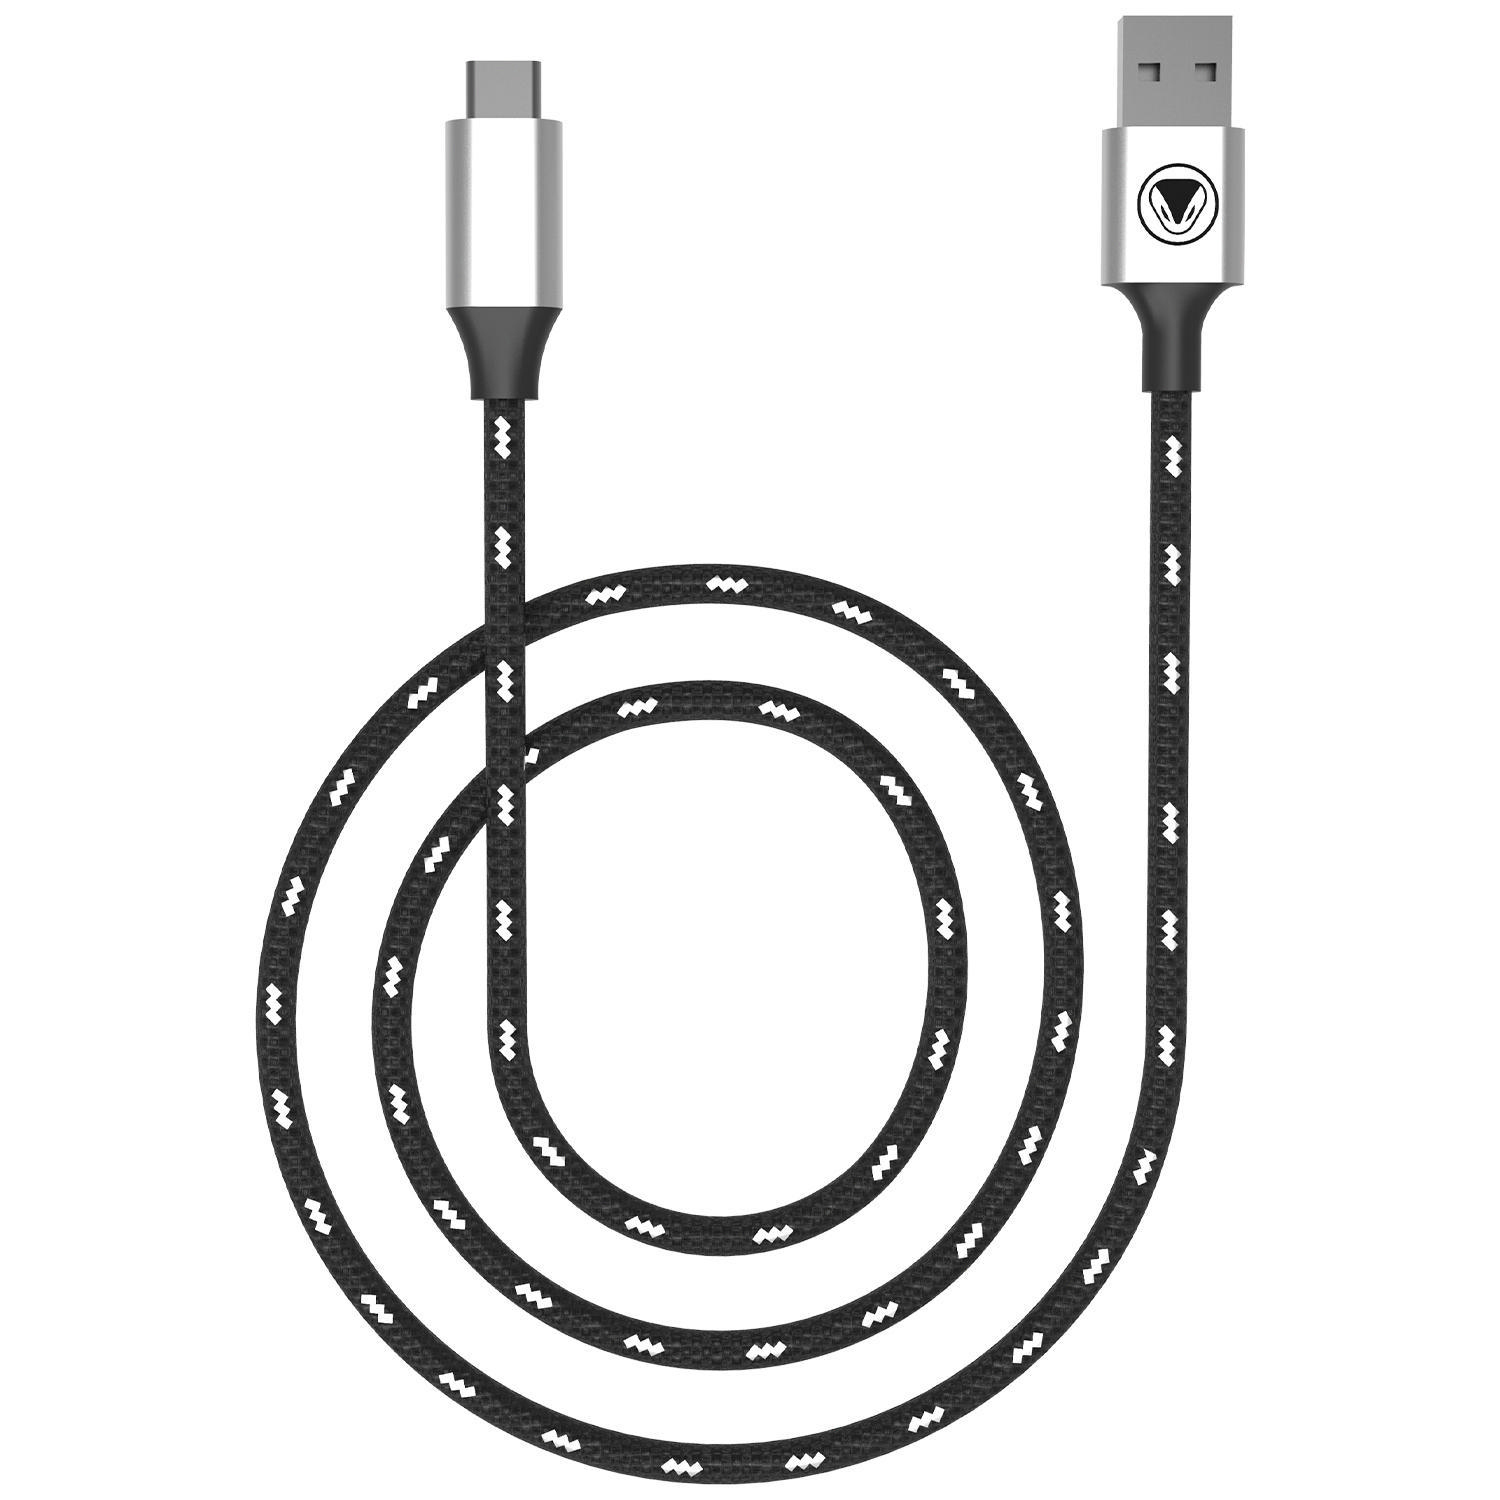 & PS5, SNAKEBYTE (2m) PS5 Data: Schwarz/Weiß 5 Charge USB CABLE Zubehör